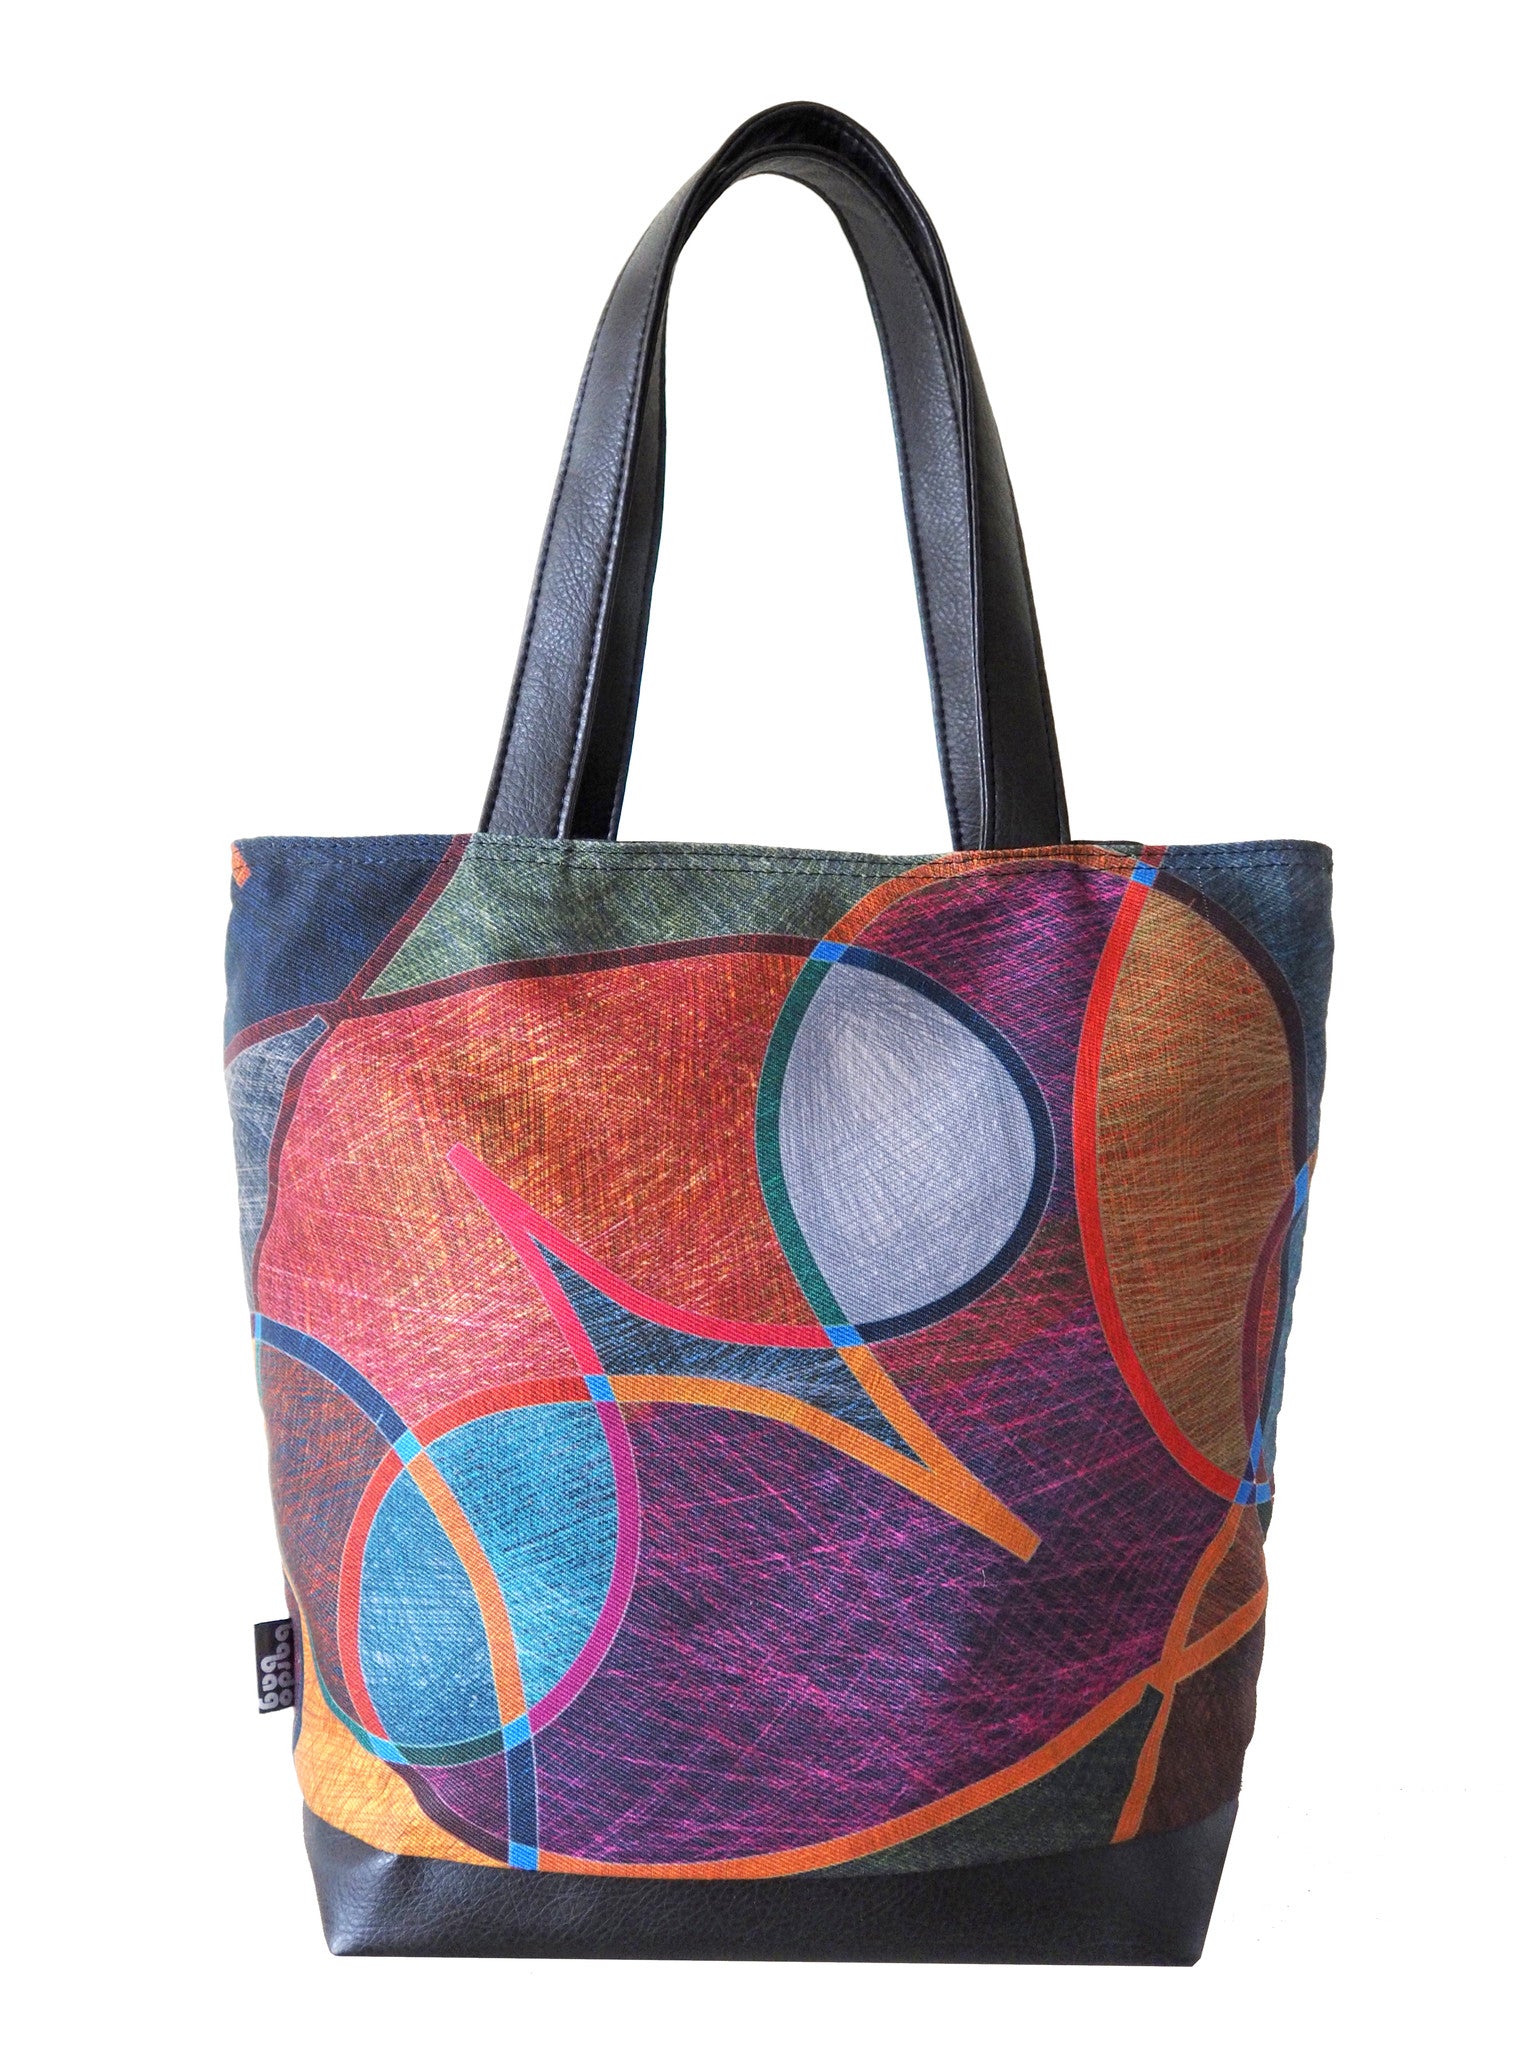 Bardo large tote bag - Butterfly - Premium large tote bag from Bardo bag - Just lvabstract, black, Butterfly, clover, dark blue, floral, flower, gift, handemade, large, orange, red, tablet, tote bag, vegan leather, woman, work bag, yellow89.00! Shop now at BARDO ART WORKS